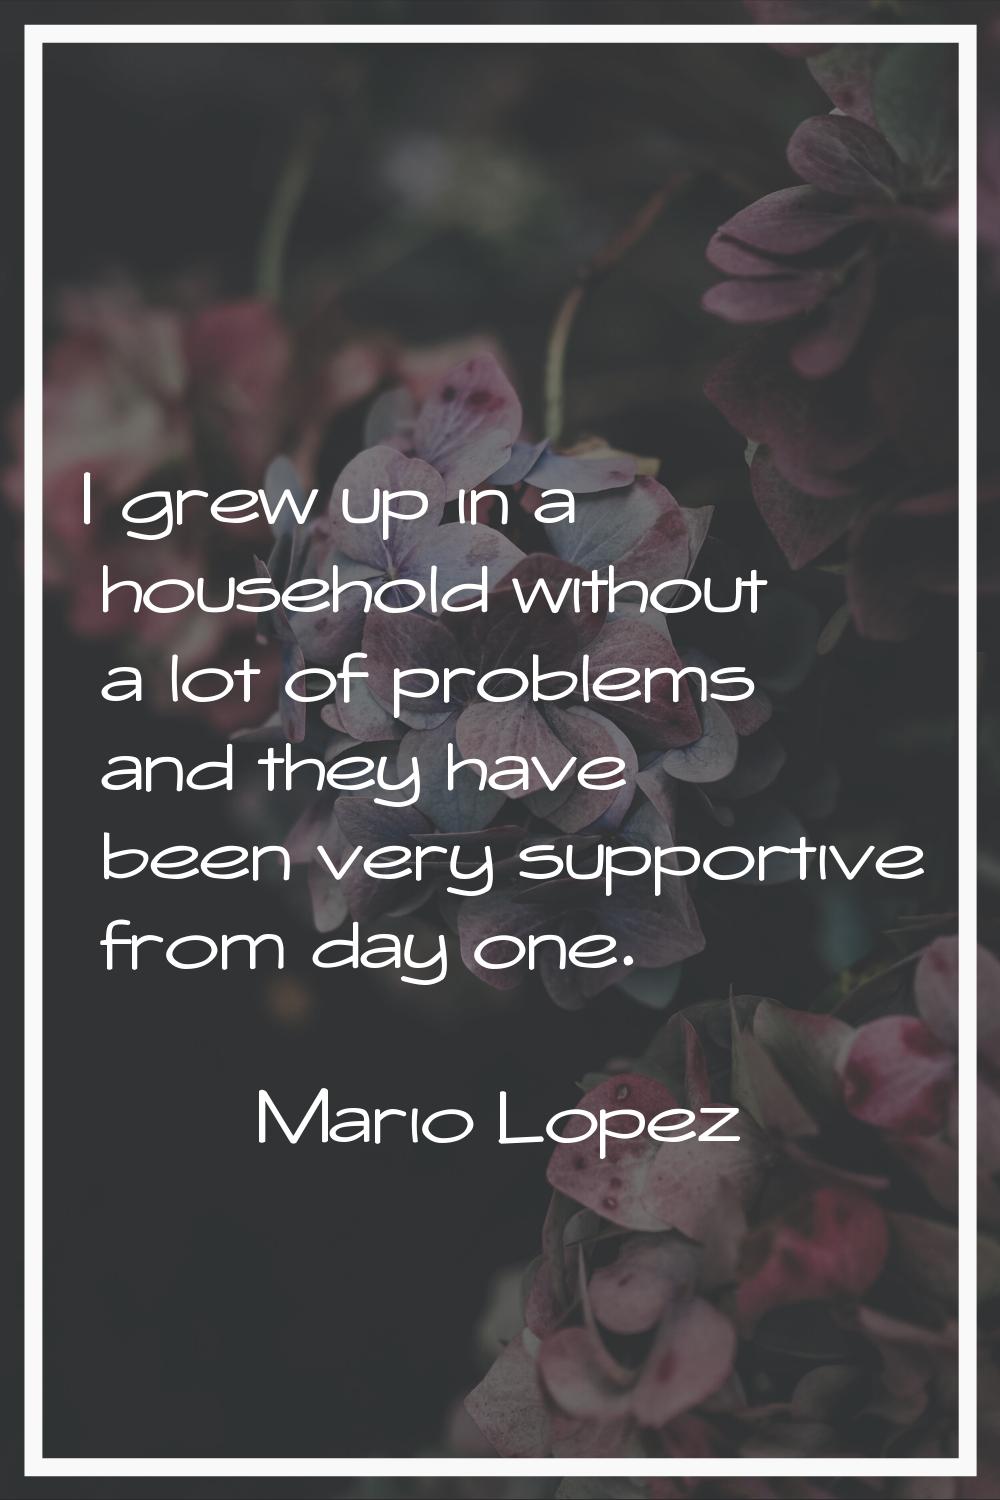 I grew up in a household without a lot of problems and they have been very supportive from day one.